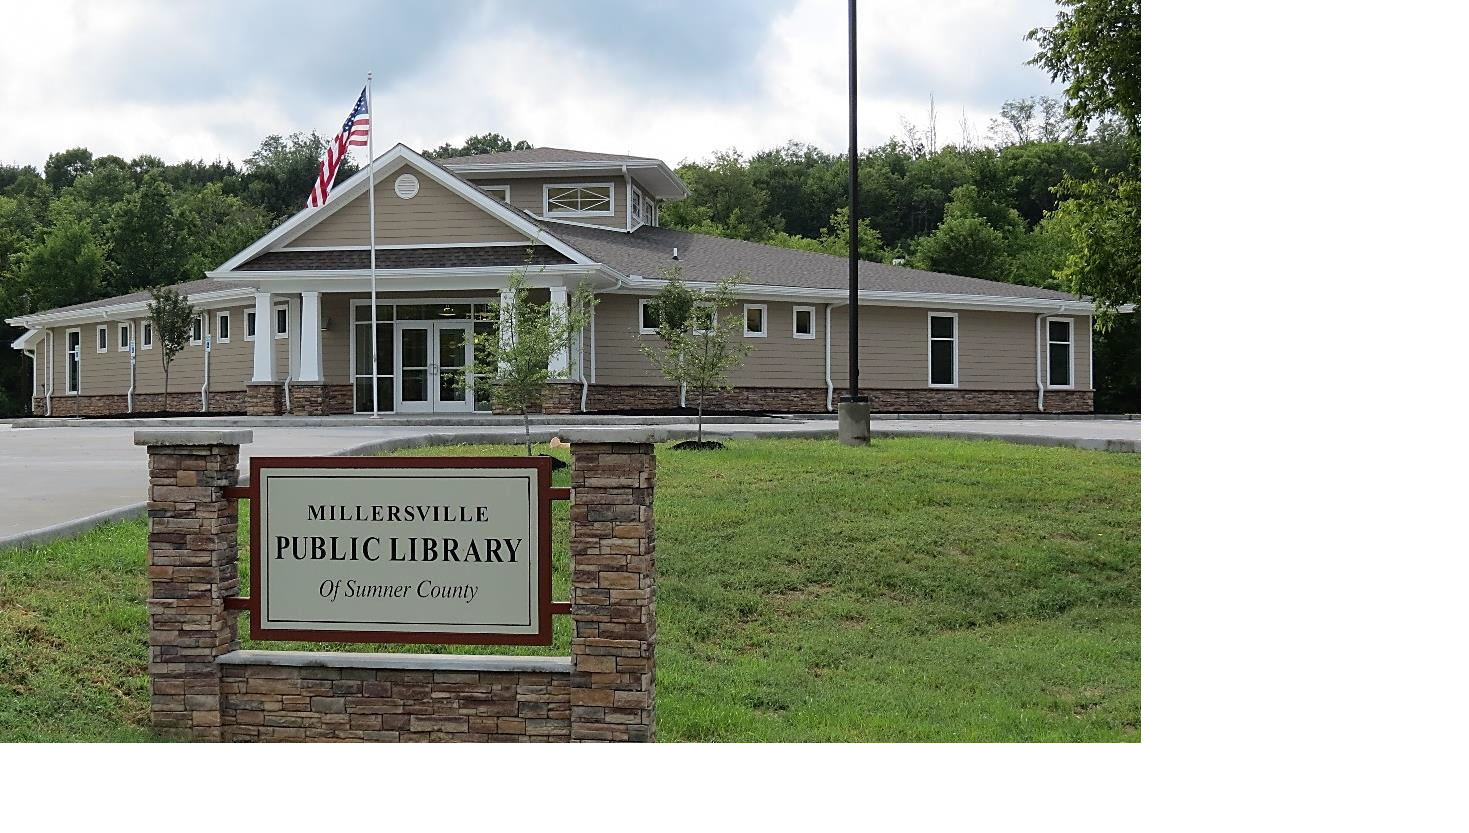 Millersville Public Library of Sumner County